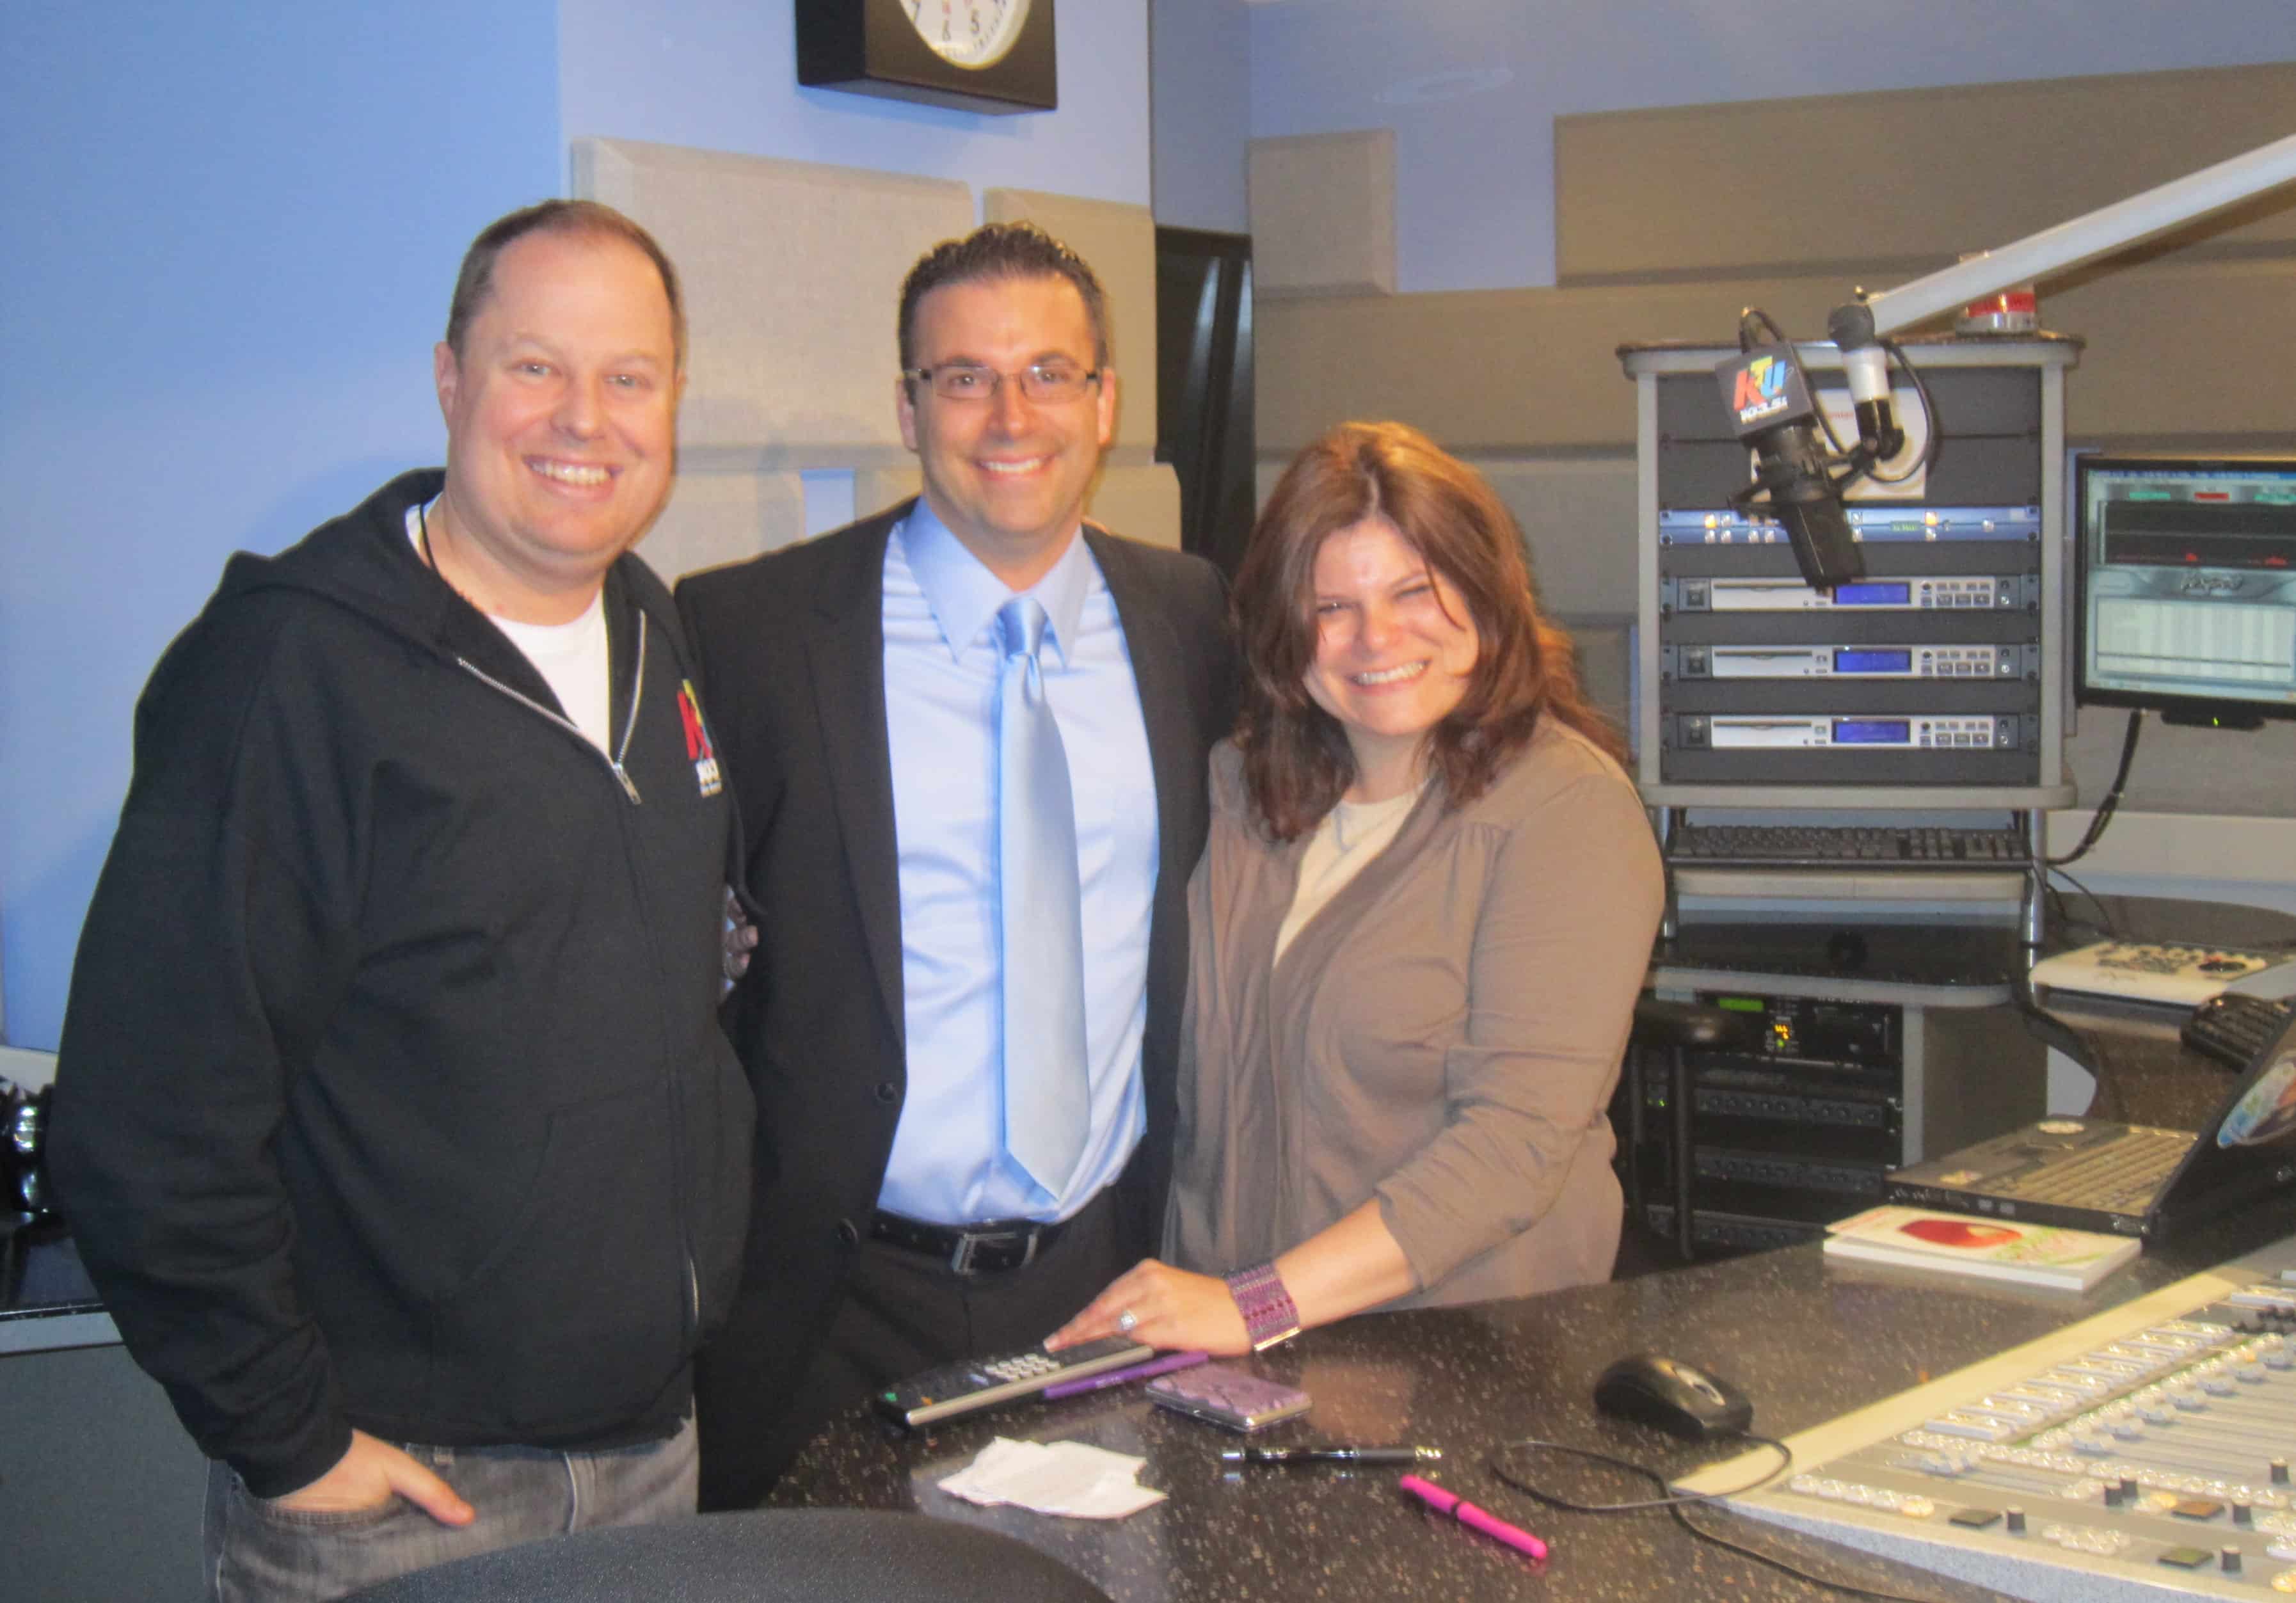 Dr Spages with Cindy Vero and Cubby on 103.5 KTU NY